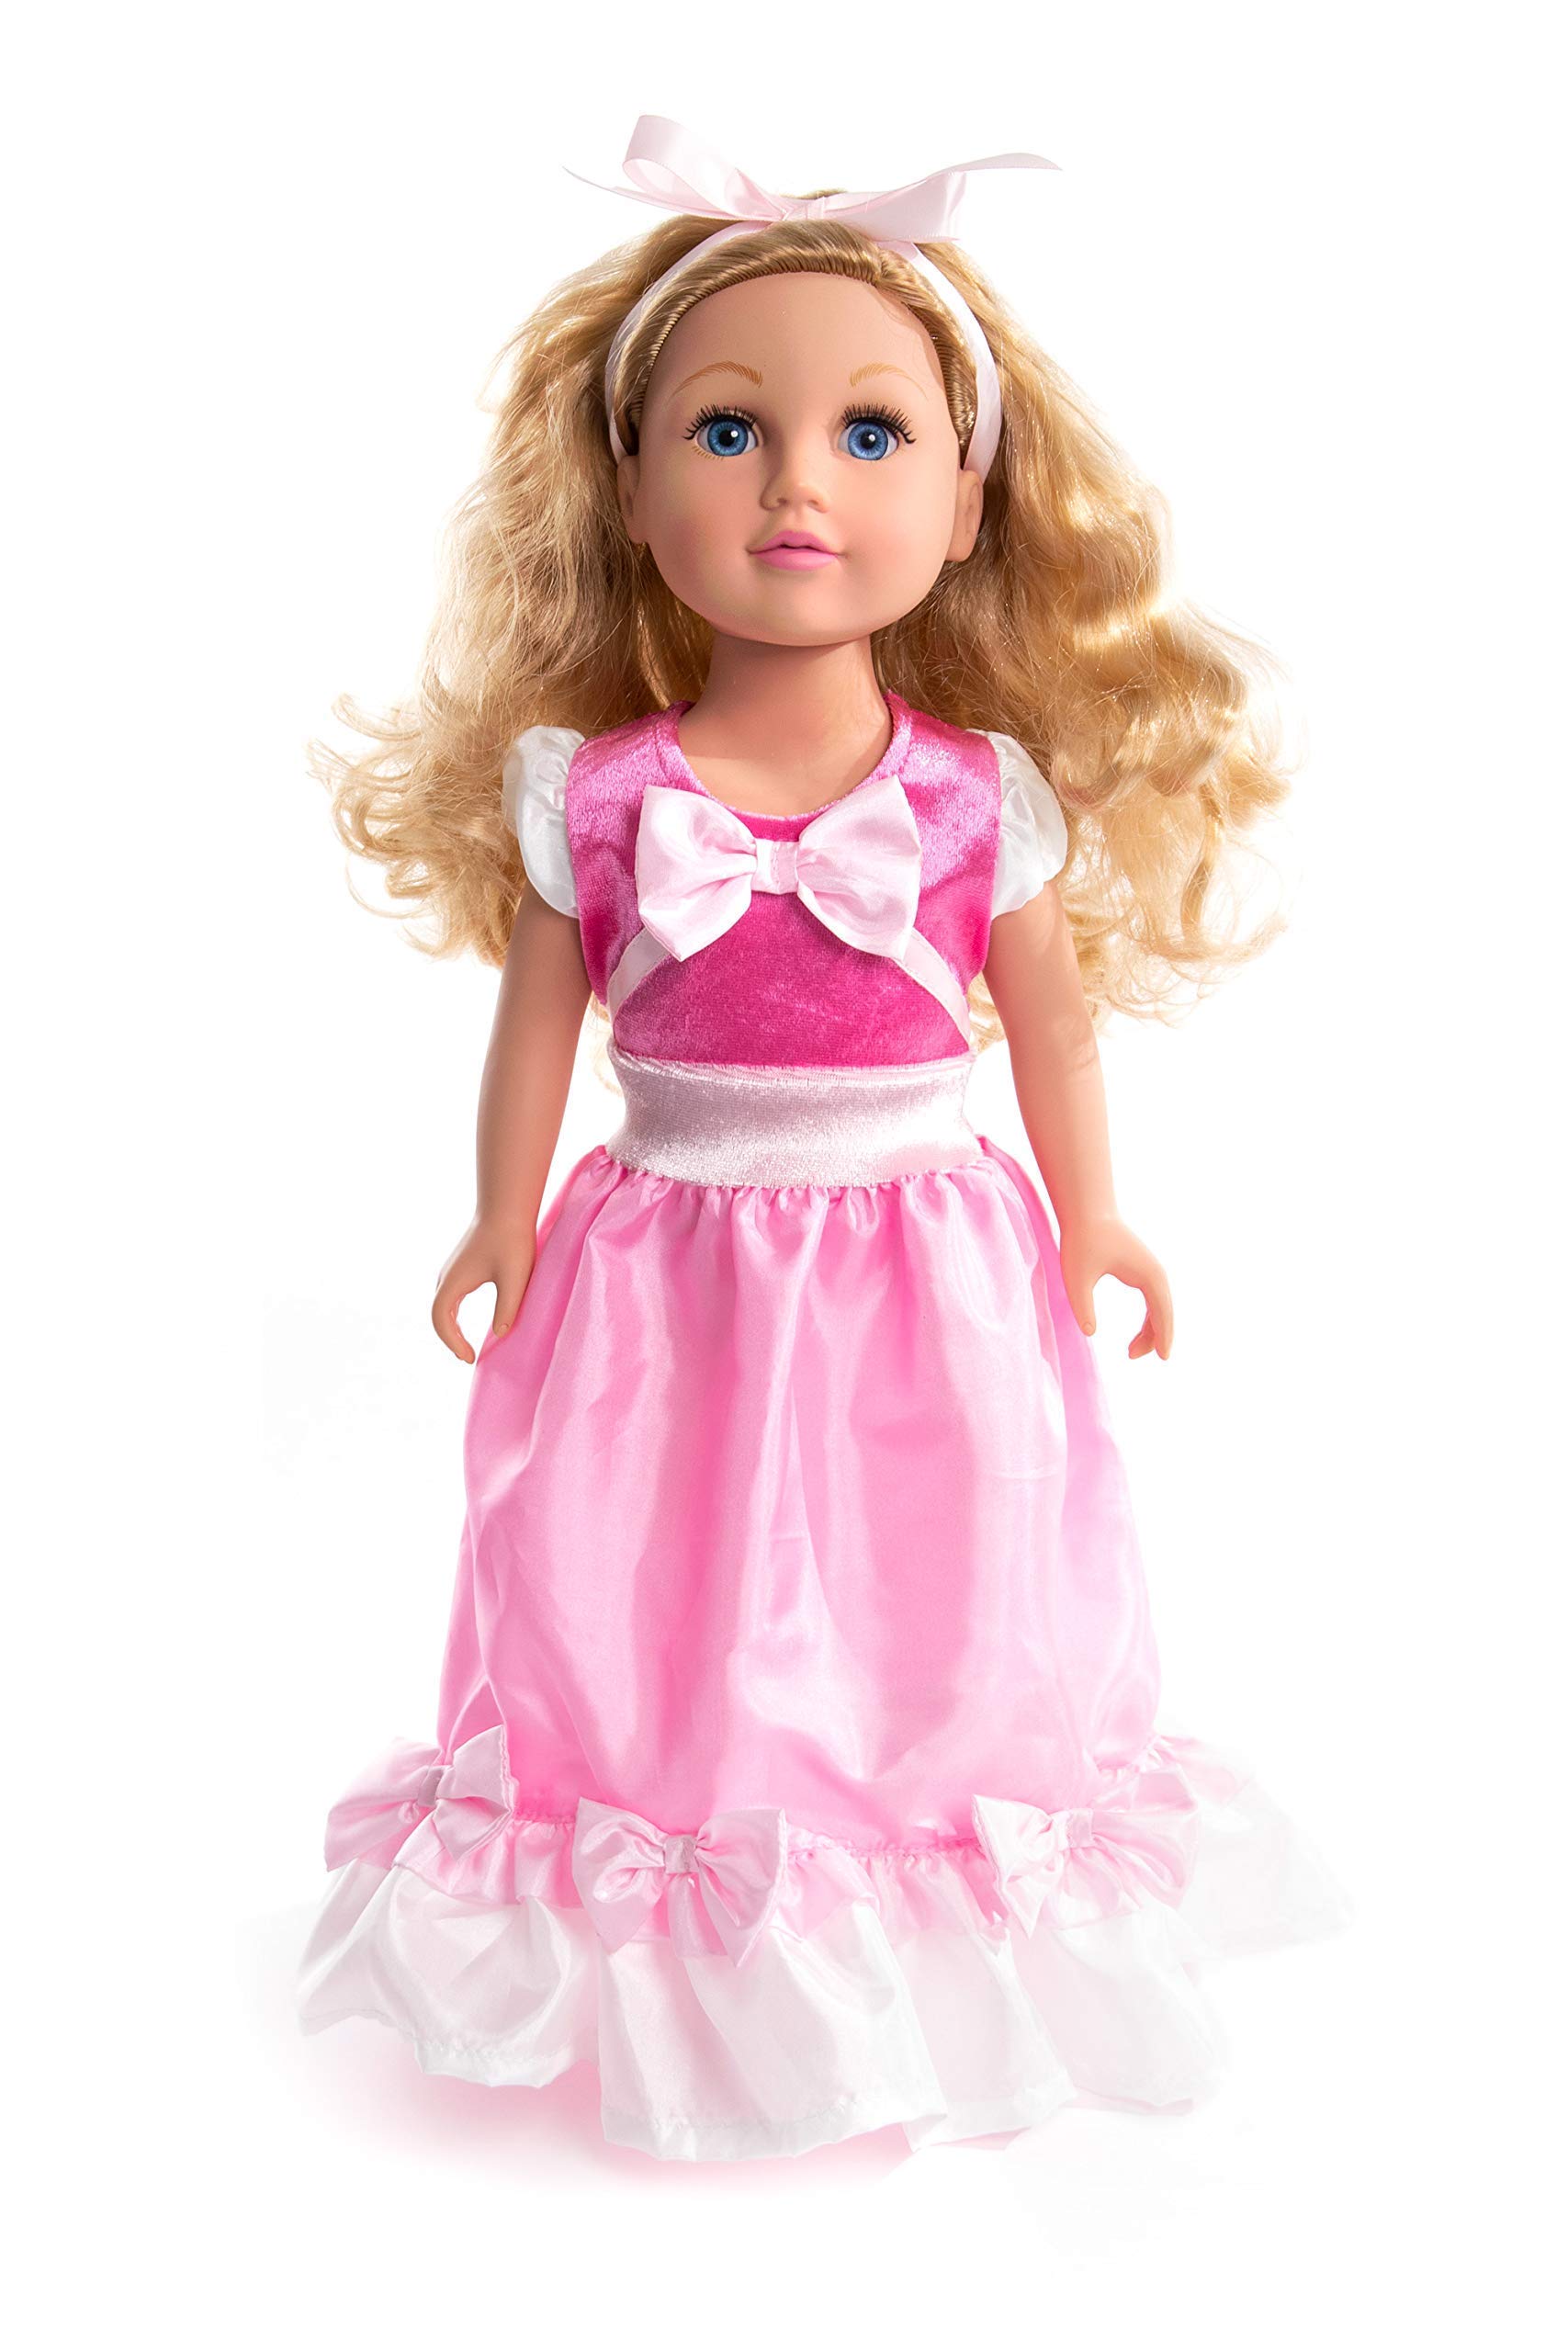 Little Adventures Cinderella Pink Ball Gown Dress up Costume (Large Age 5-7) with Matching Doll Dress - Machine Washable Child Pretend Play and Party Dress with No Glitter